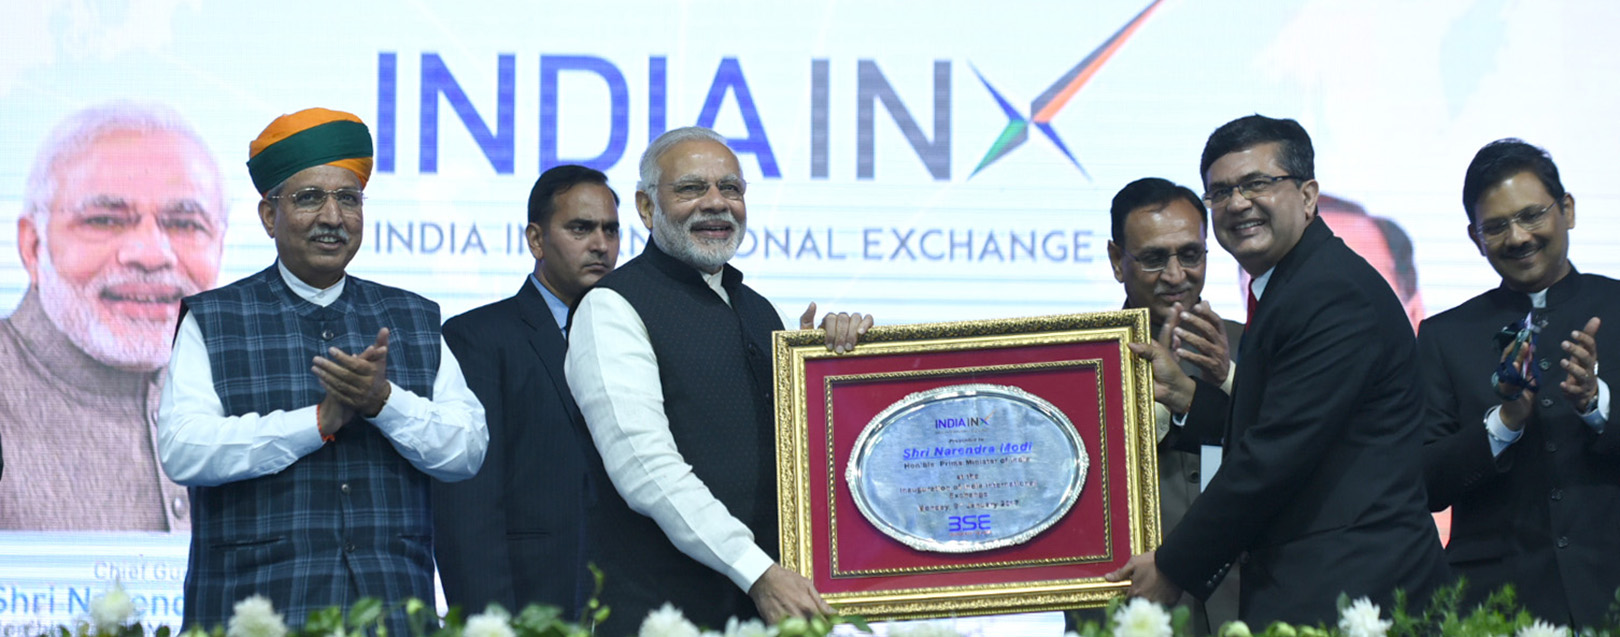 Modi inaugurates India's first int'l exchange at GIFT city